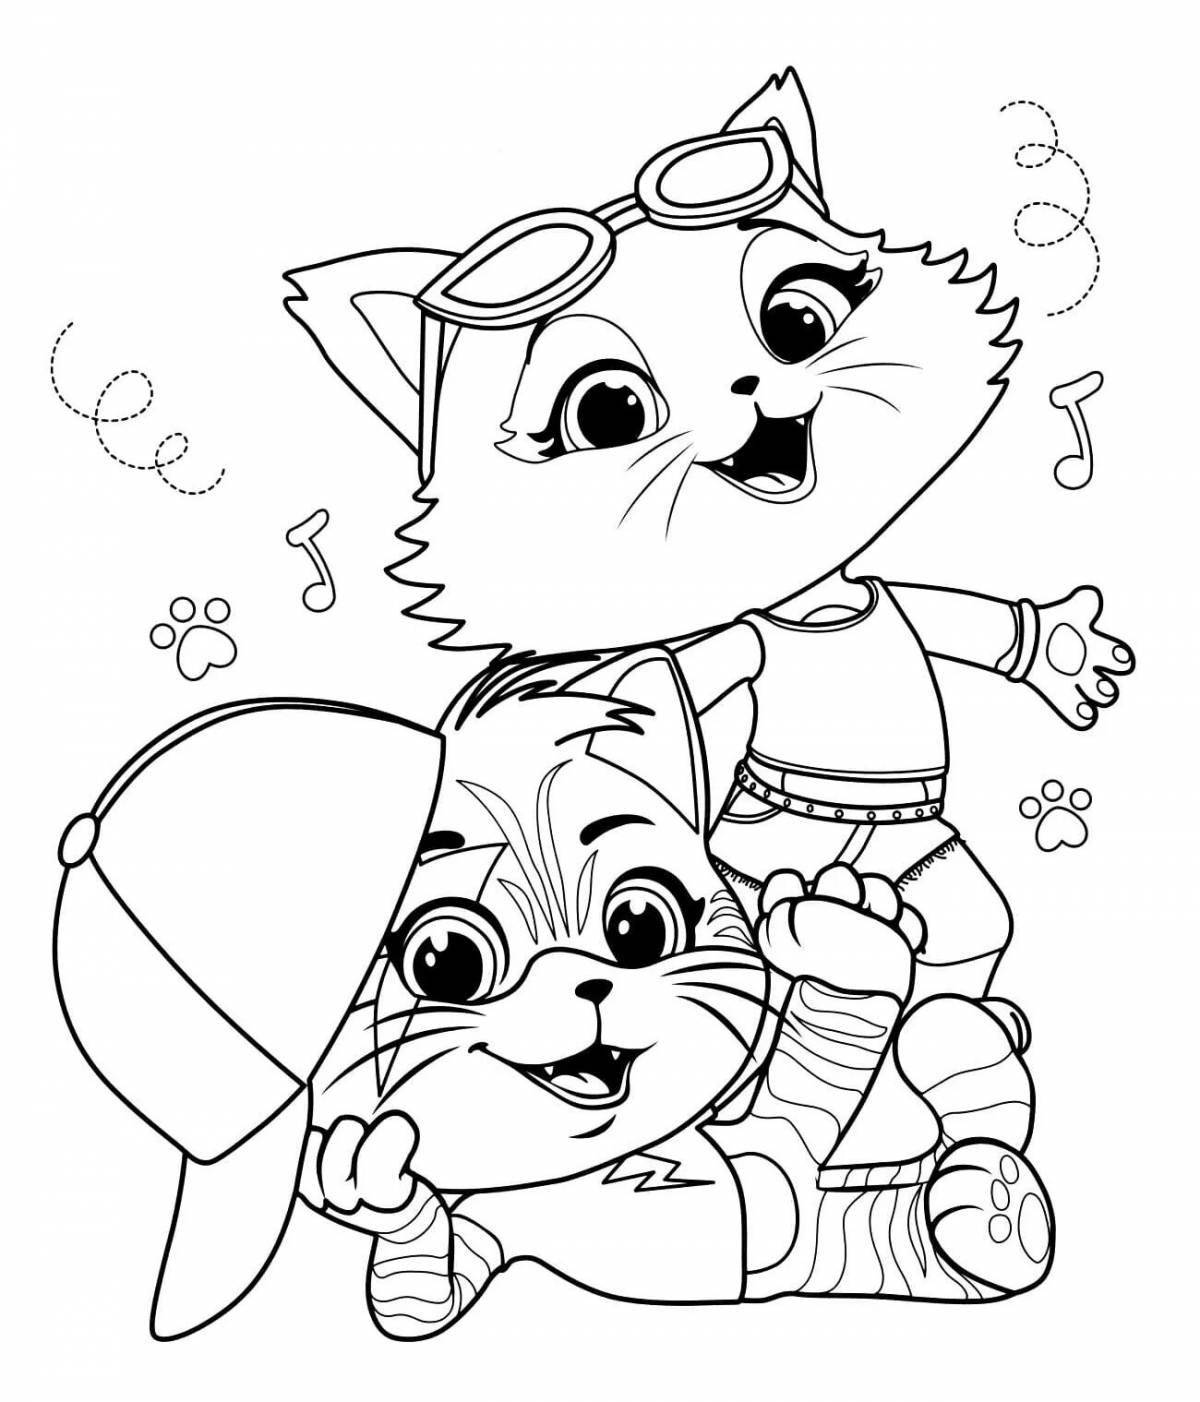 Colorful cats and dogs coloring book